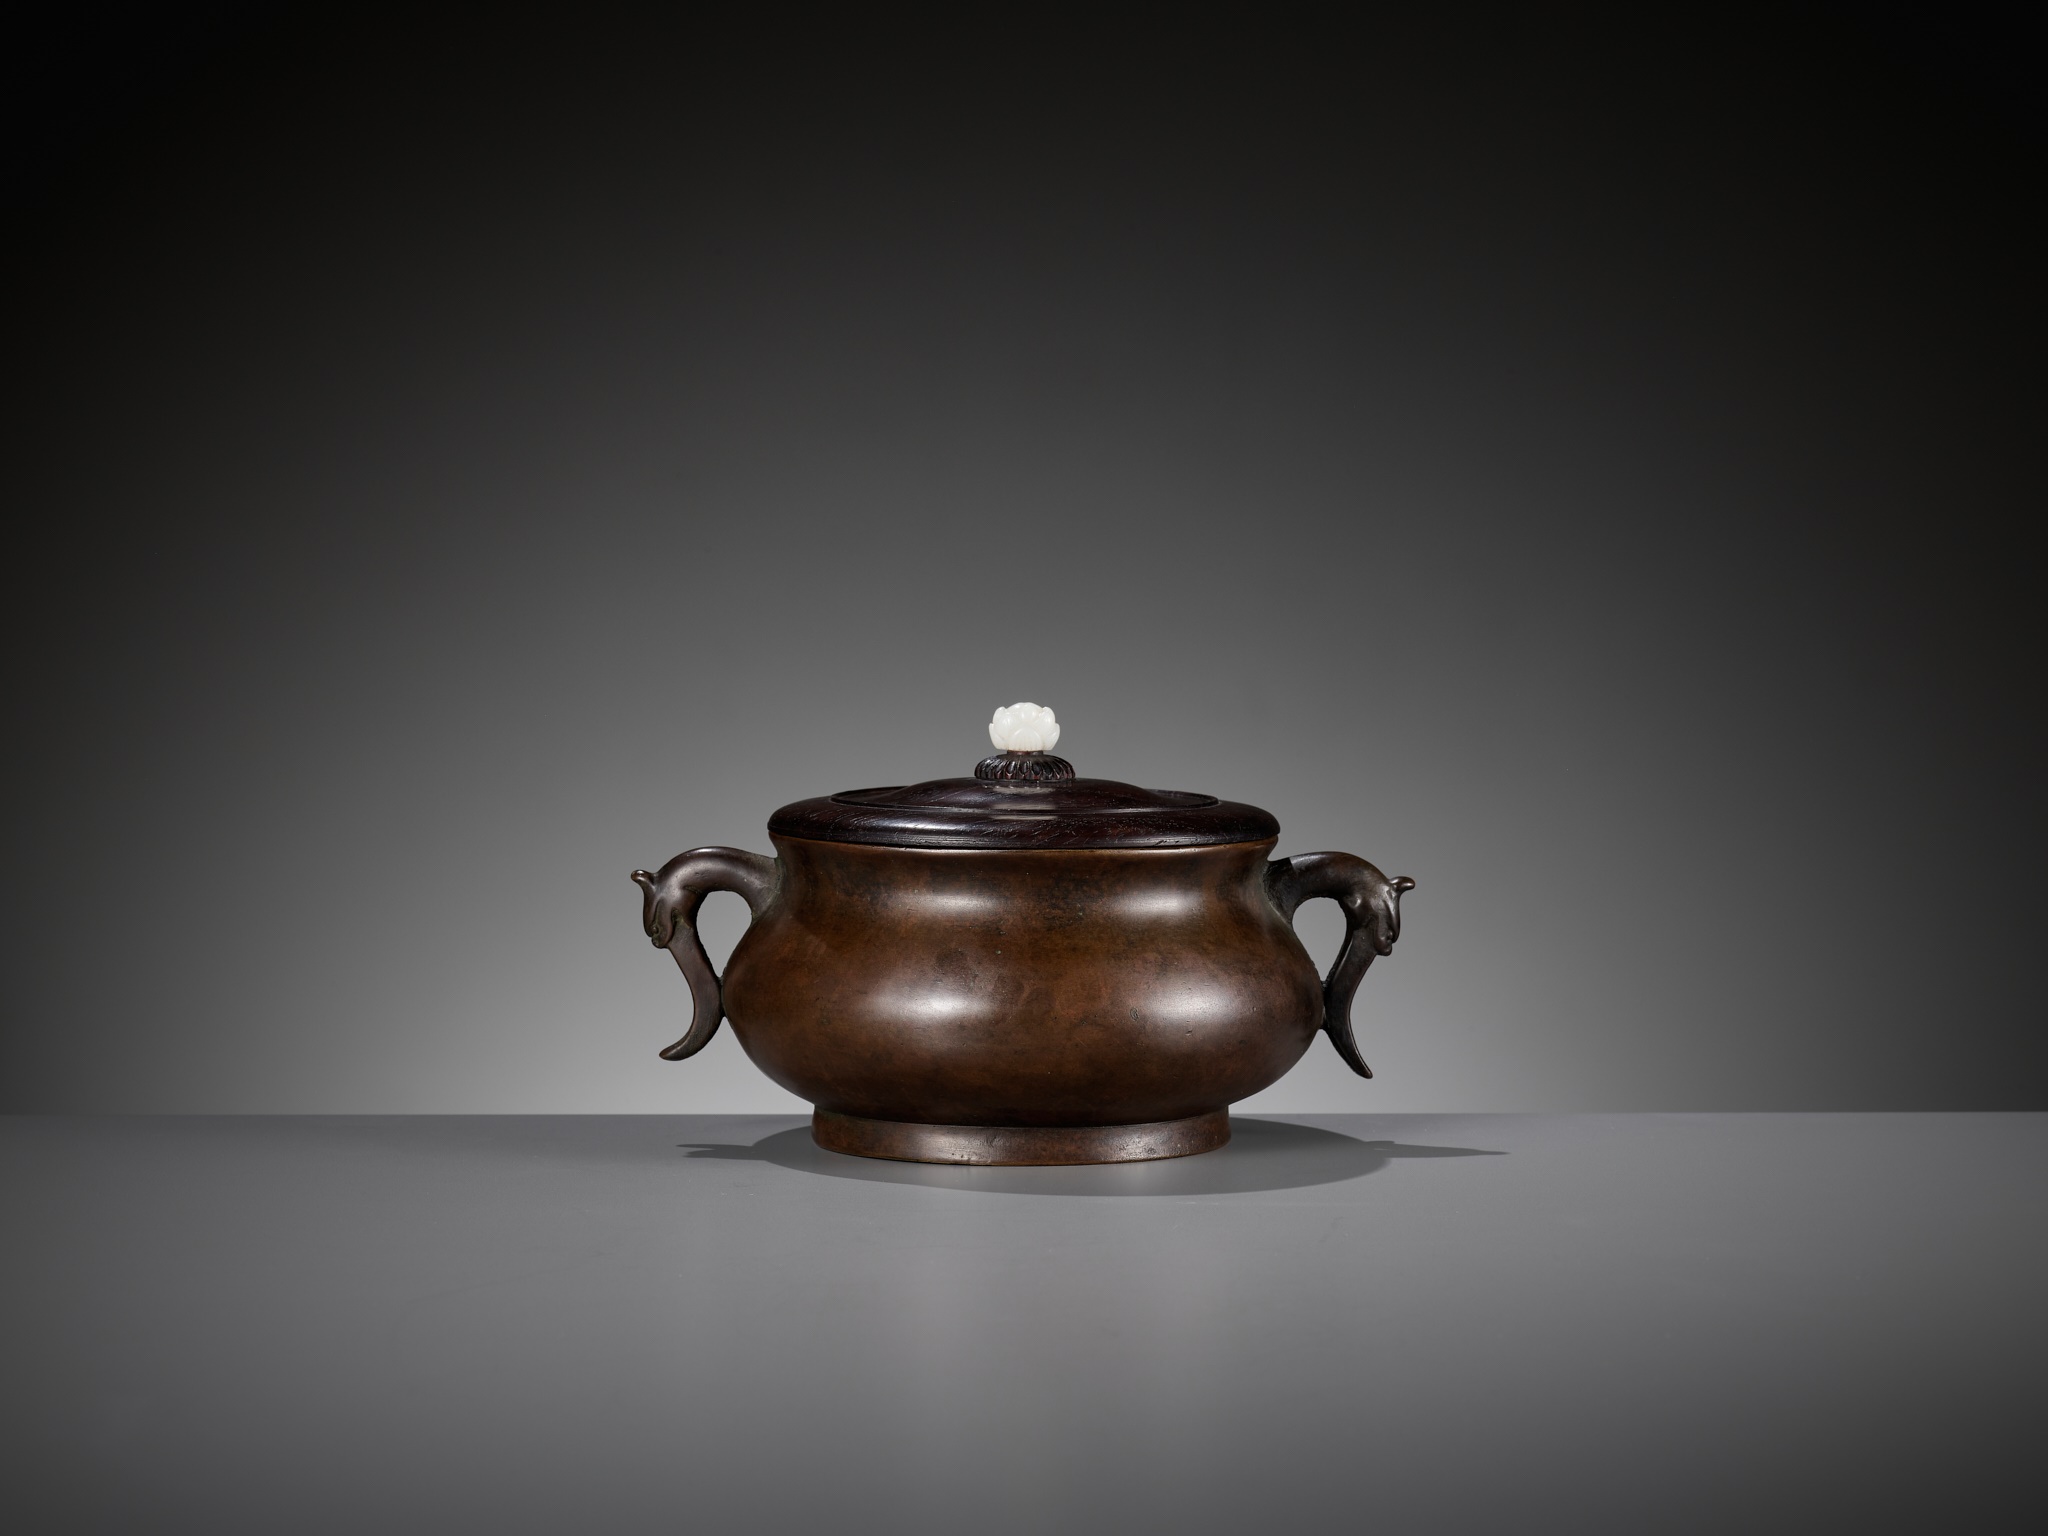 A BRONZE CENSER WITH A ZITAN WOOD COVER AND A WHITE JADE FINIAL, 17TH-18TH CENTURY - Image 9 of 16